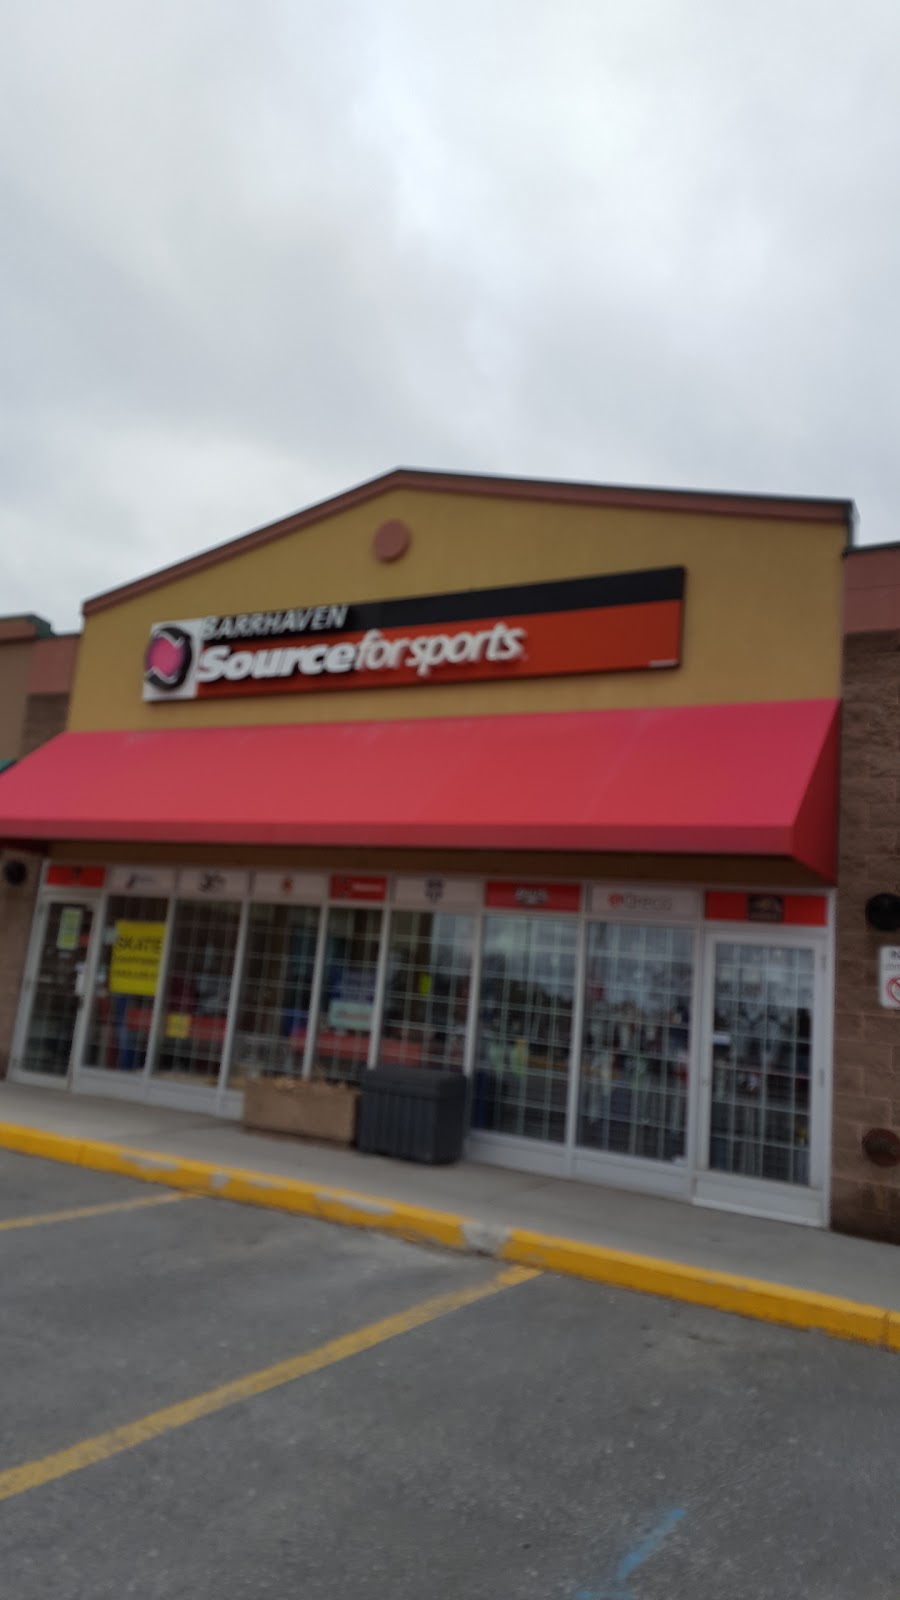 Barrhaven Source For Sports | 1581 Greenbank Rd, Nepean, ON K2J 4Y6, Canada | Phone: (613) 823-9022